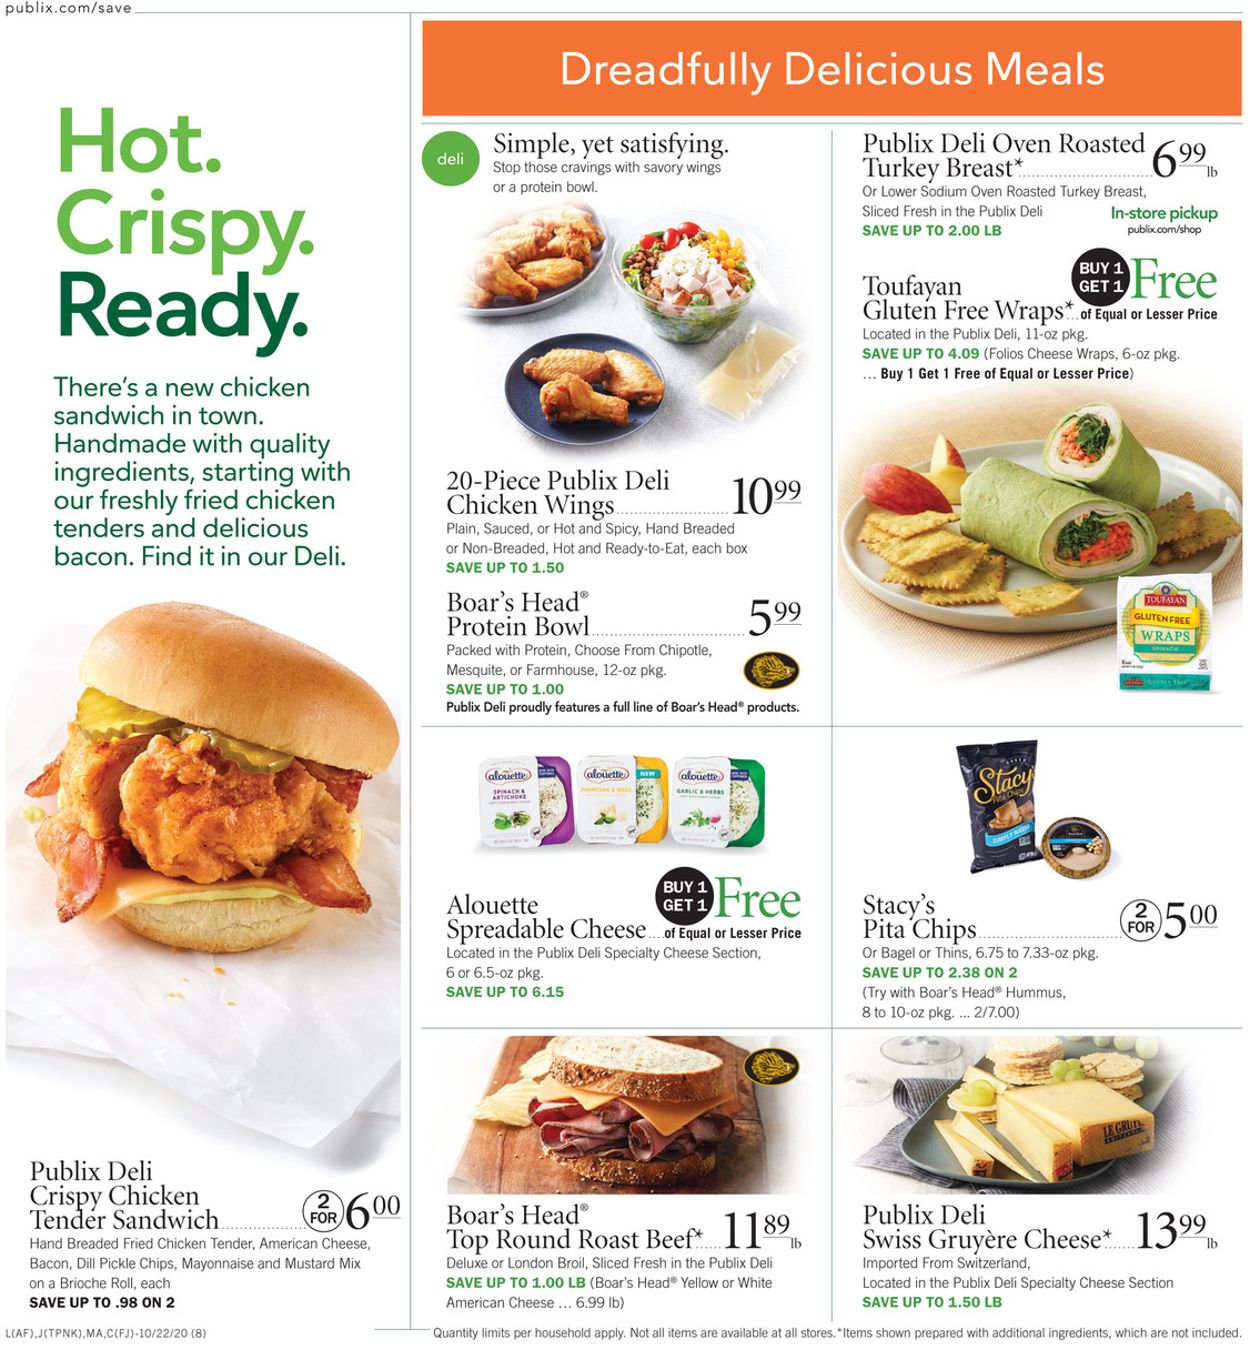 Publix Current weekly ad 10/22 - 10/28/2020 [8] - frequent-ads.com